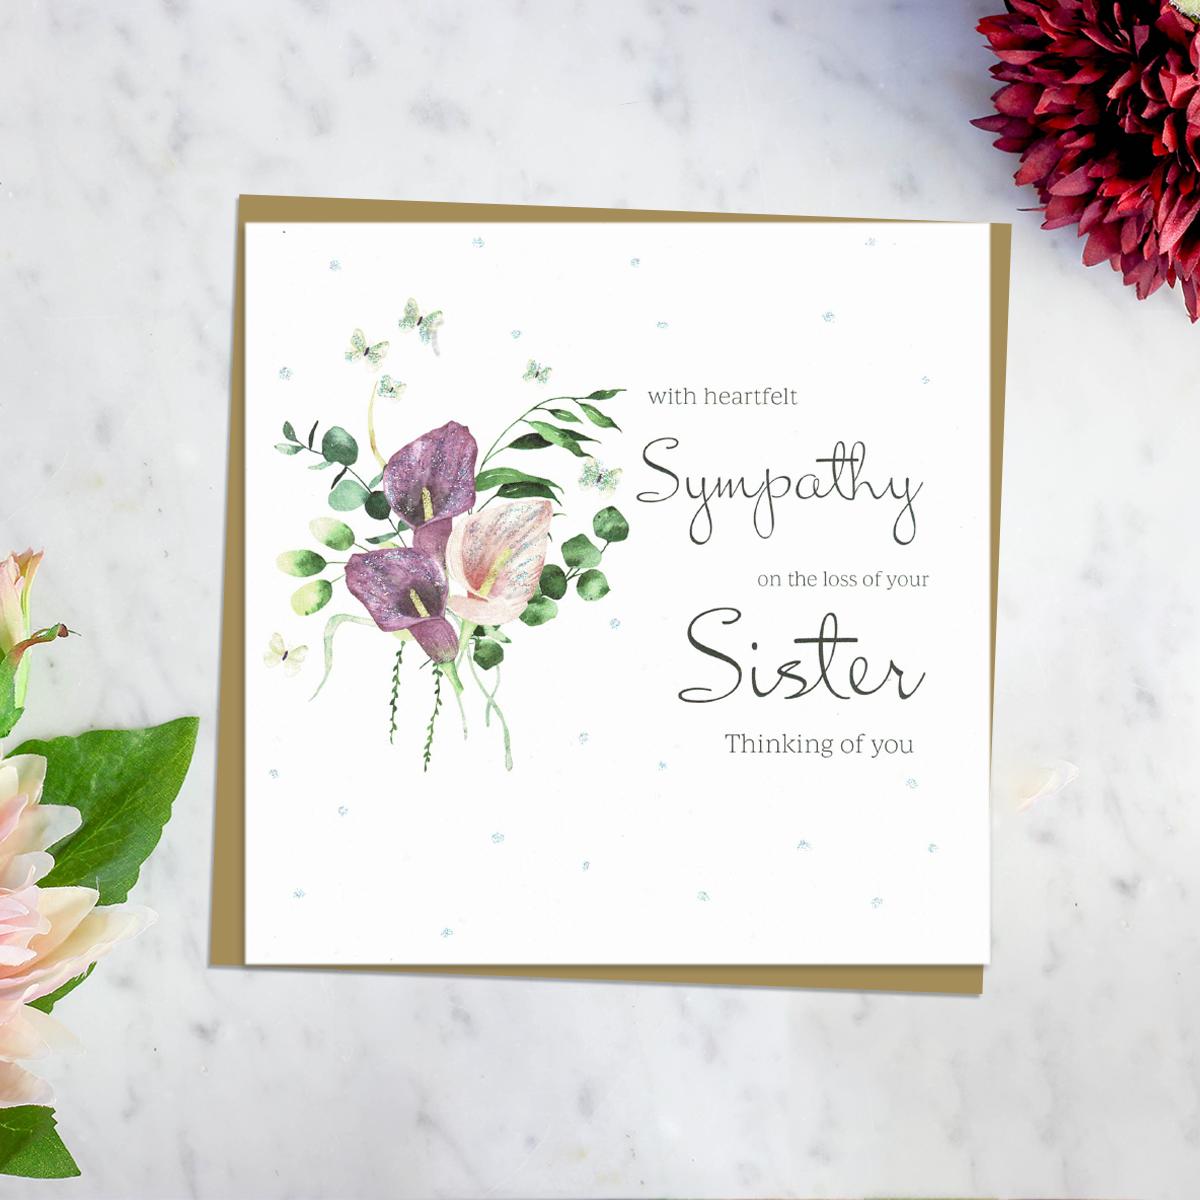 ' With Heartfelt Sympathy On The Loss Of Your Sister Thinking Of You' Card Featuring Beautiful Calla Lilies In Purple and Pink. With Discreet sparkle And Brown Envelope. Blank Inside For Own Message